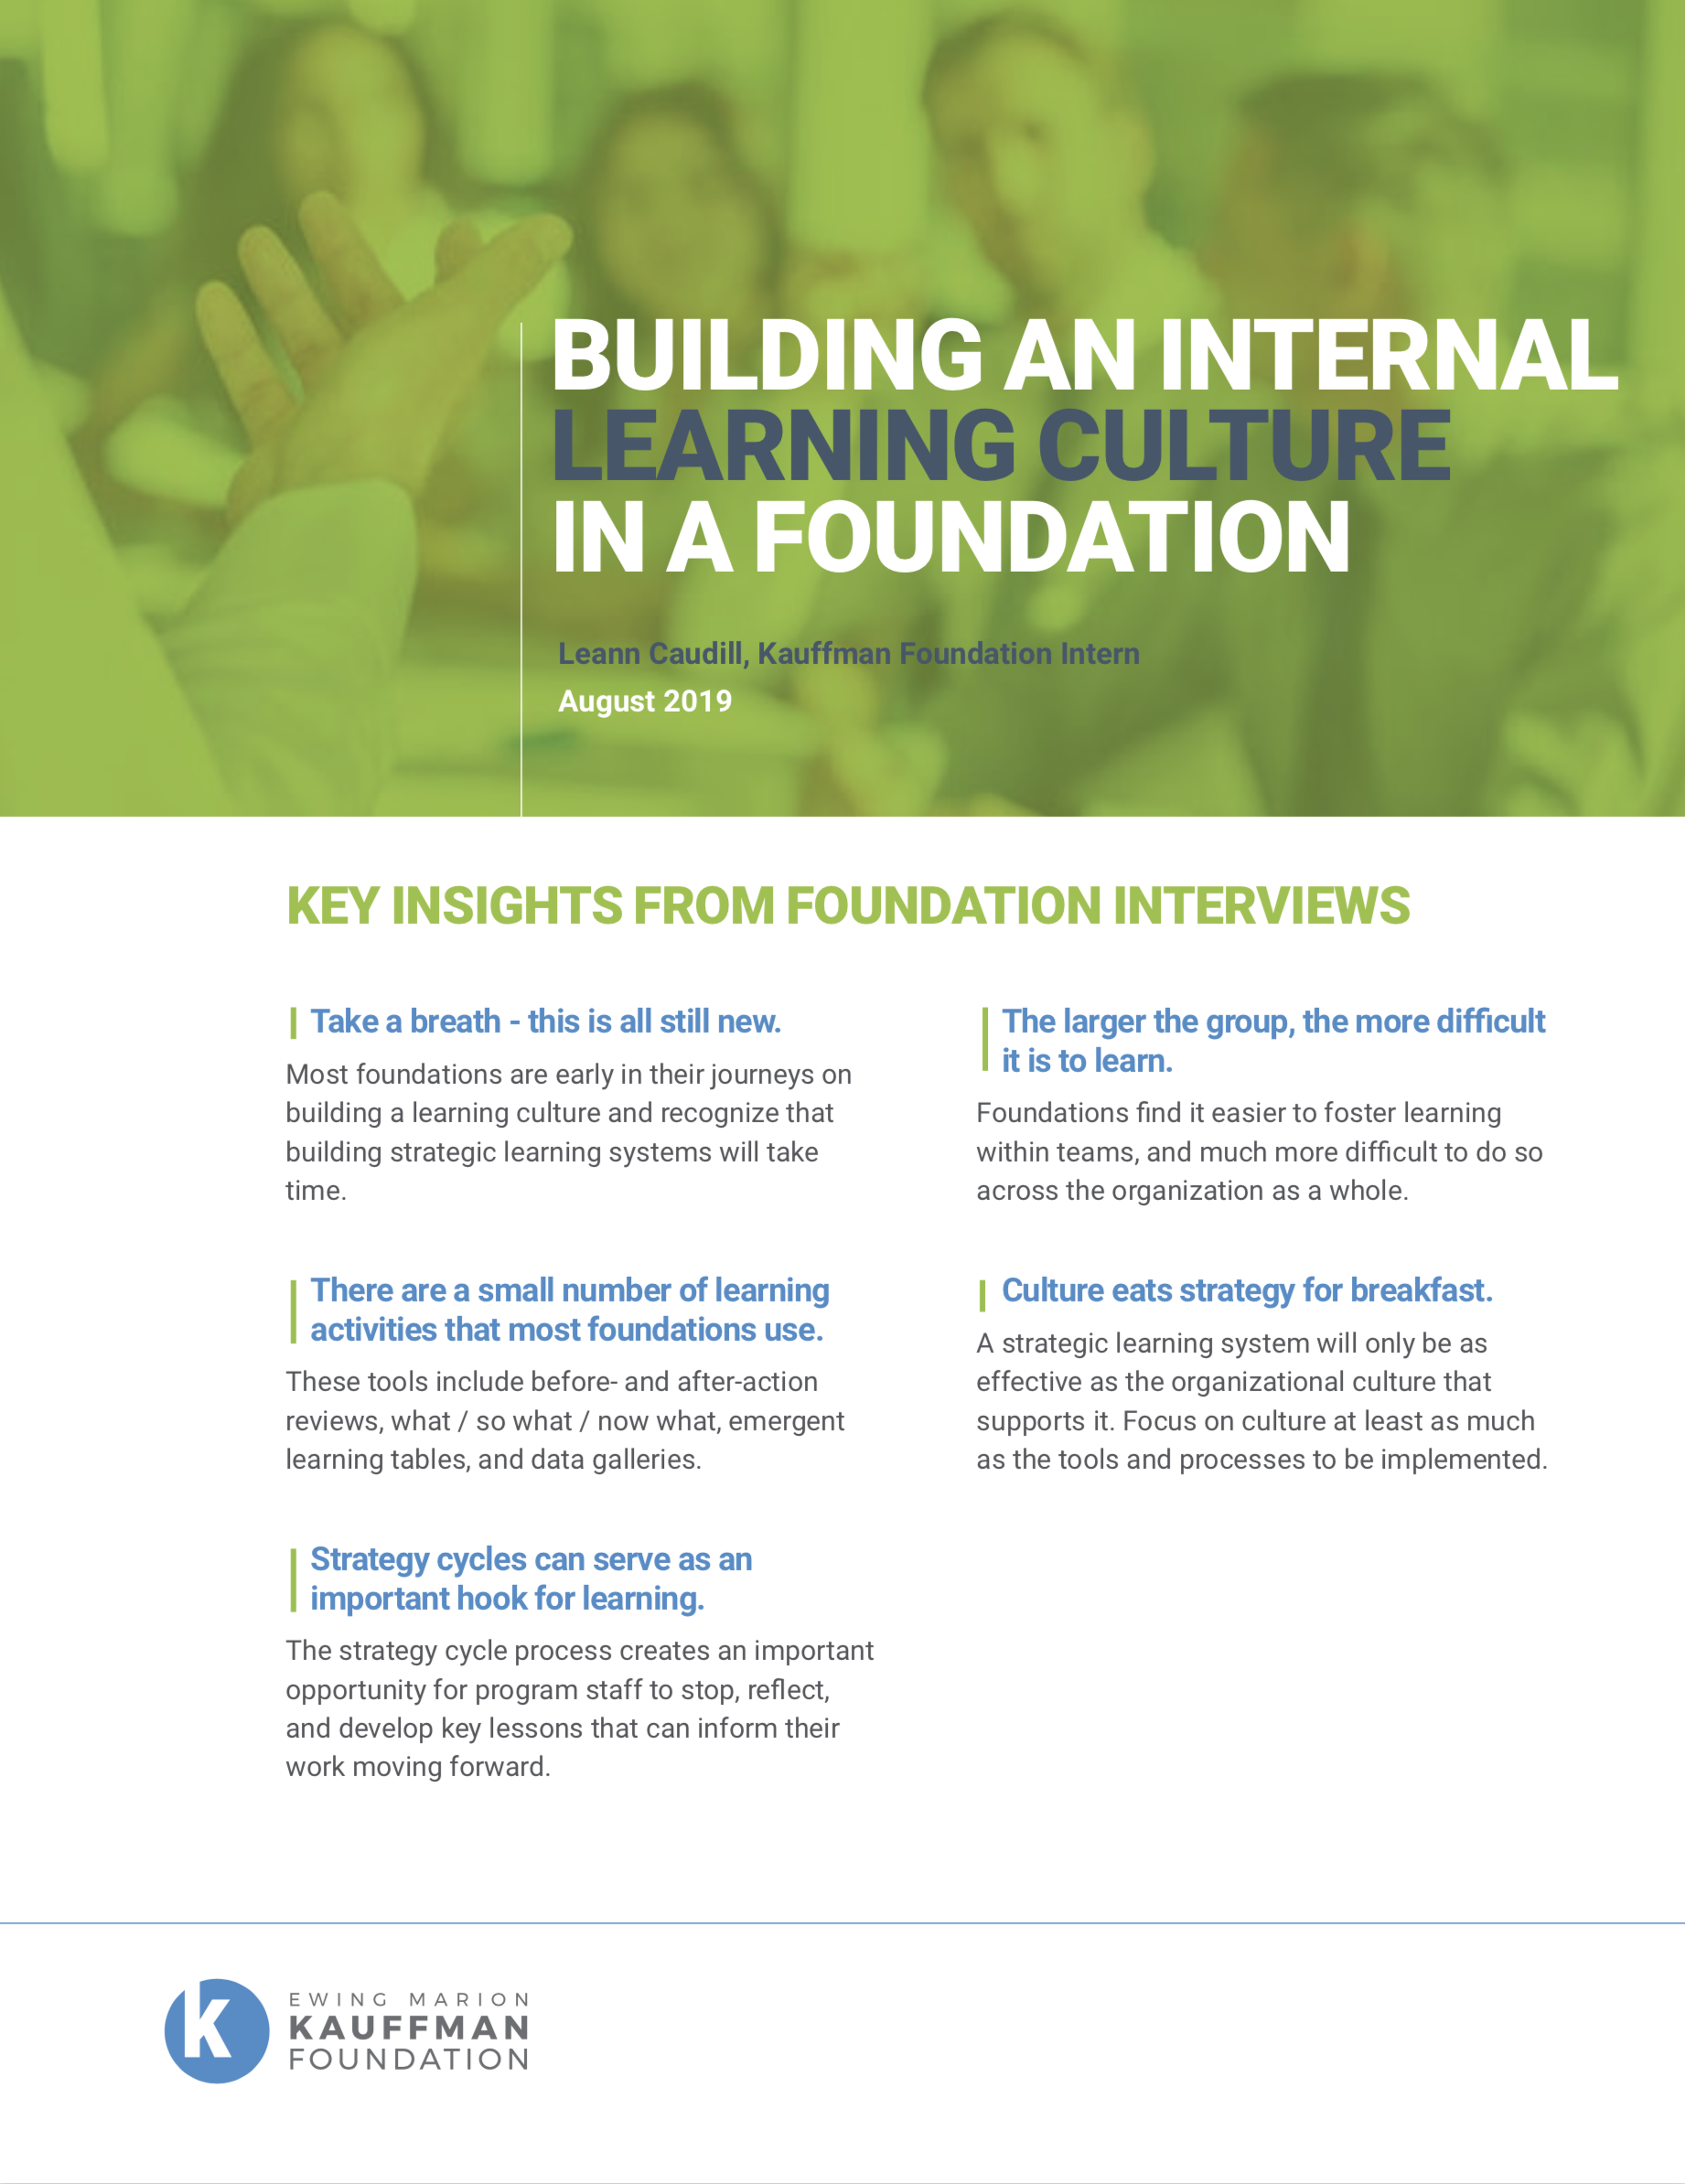 Building an Internal Learning Culture in a Foundation